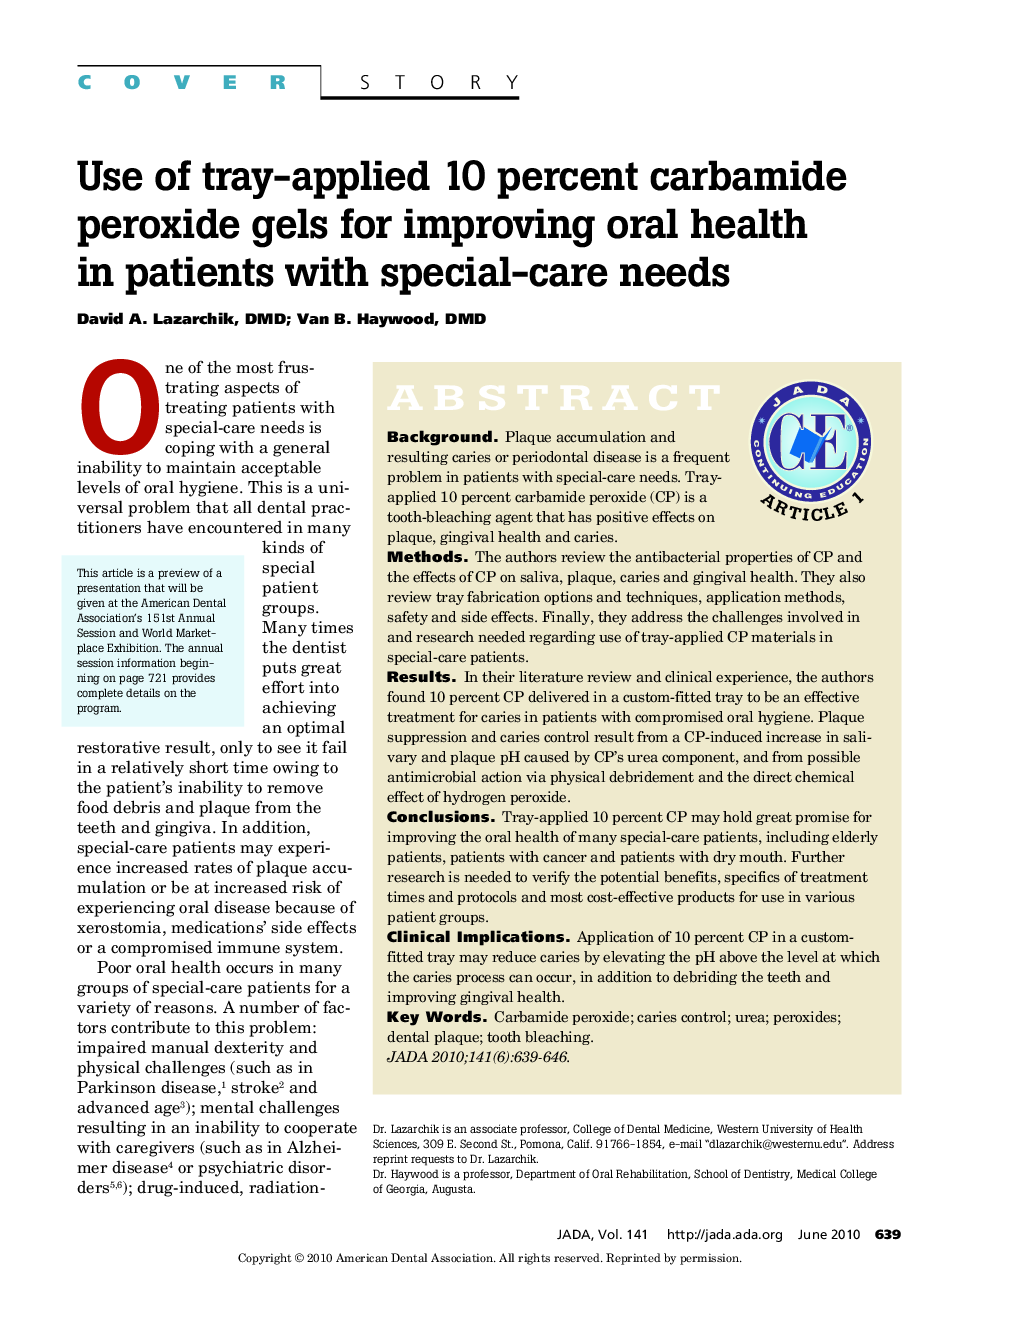 Use of Tray-Applied 10 Percent Carbamide Peroxide Gels for Improving Oral Health in Patients With Special-Care Needs 